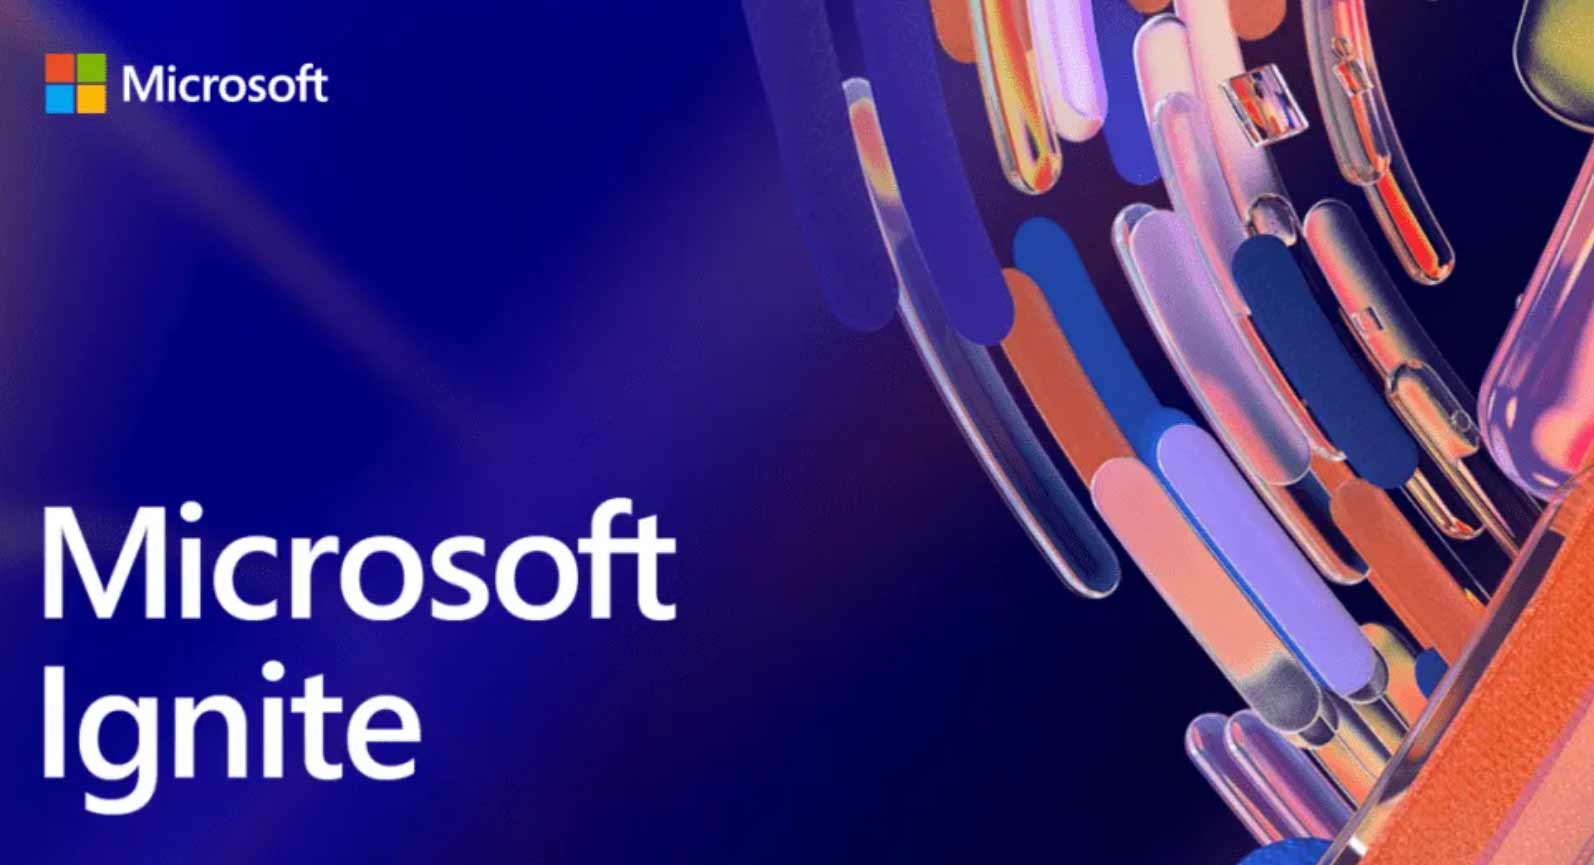 Microsoft Announces its Two Custom Chips at Ignite Event